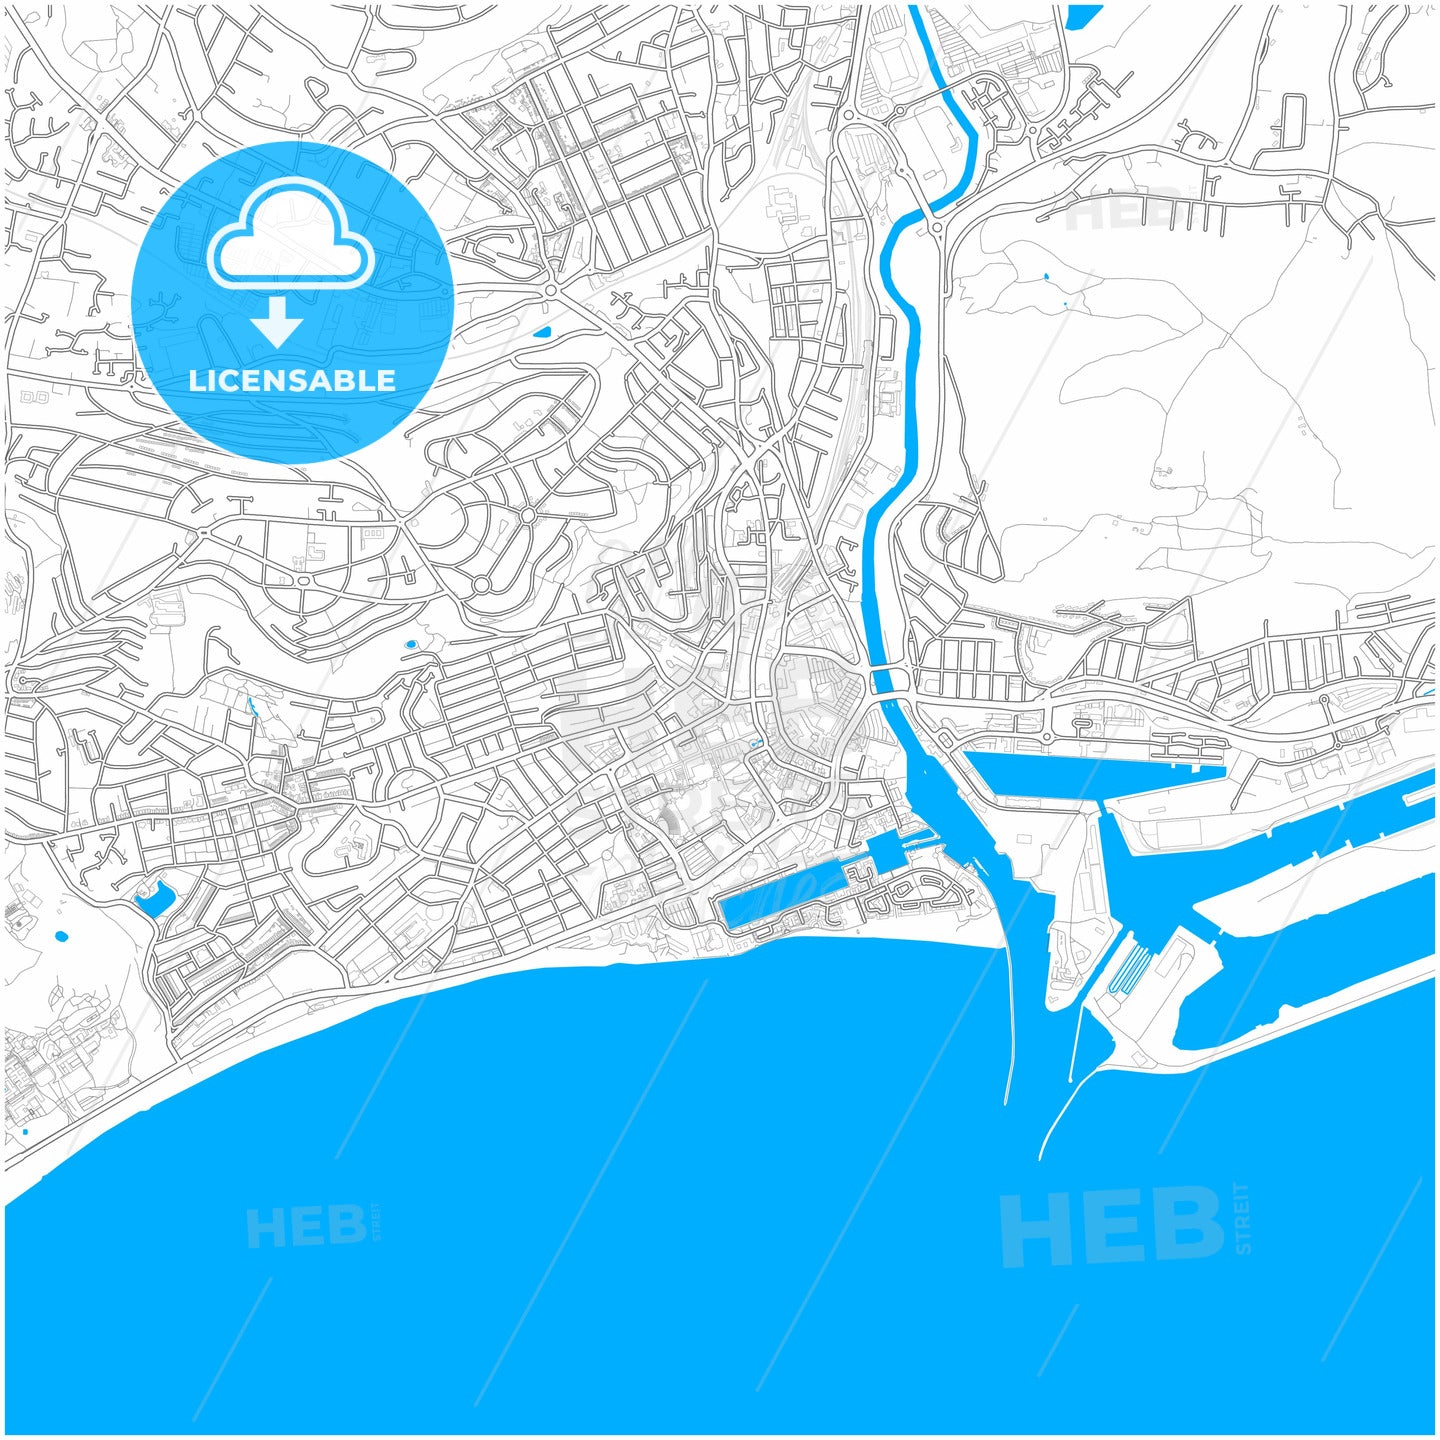 Swansea, Swansea, Wales, city map with high quality roads.